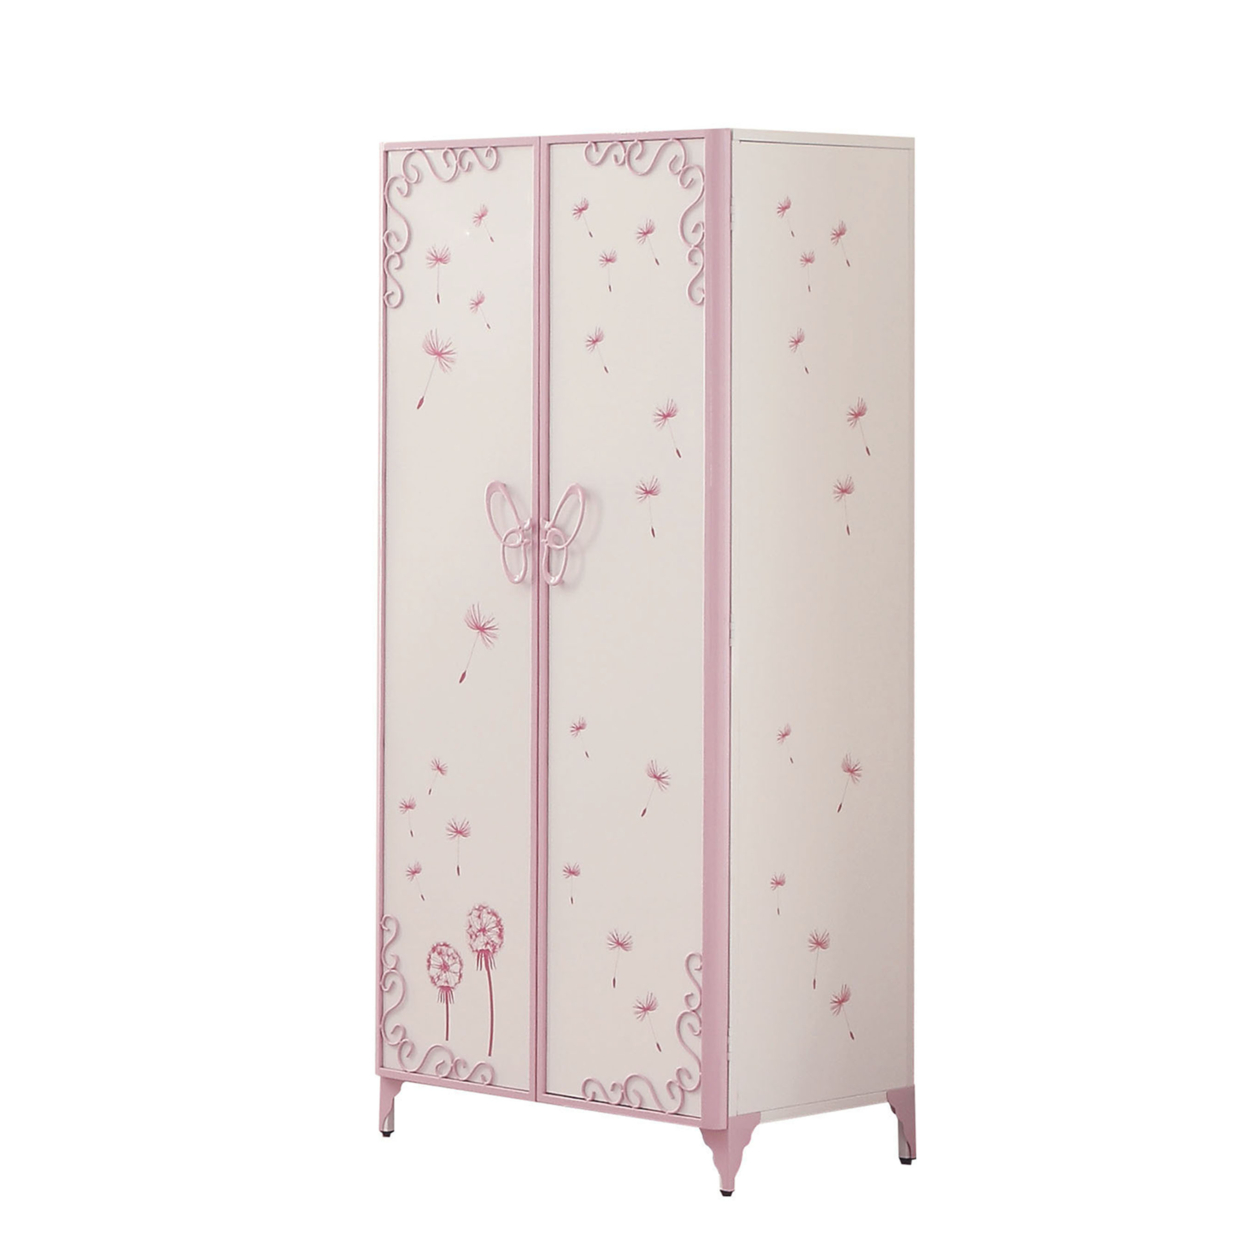 Metal Armoire With Butterfly Handle And Dandelions, White And Purple- Saltoro Sherpi